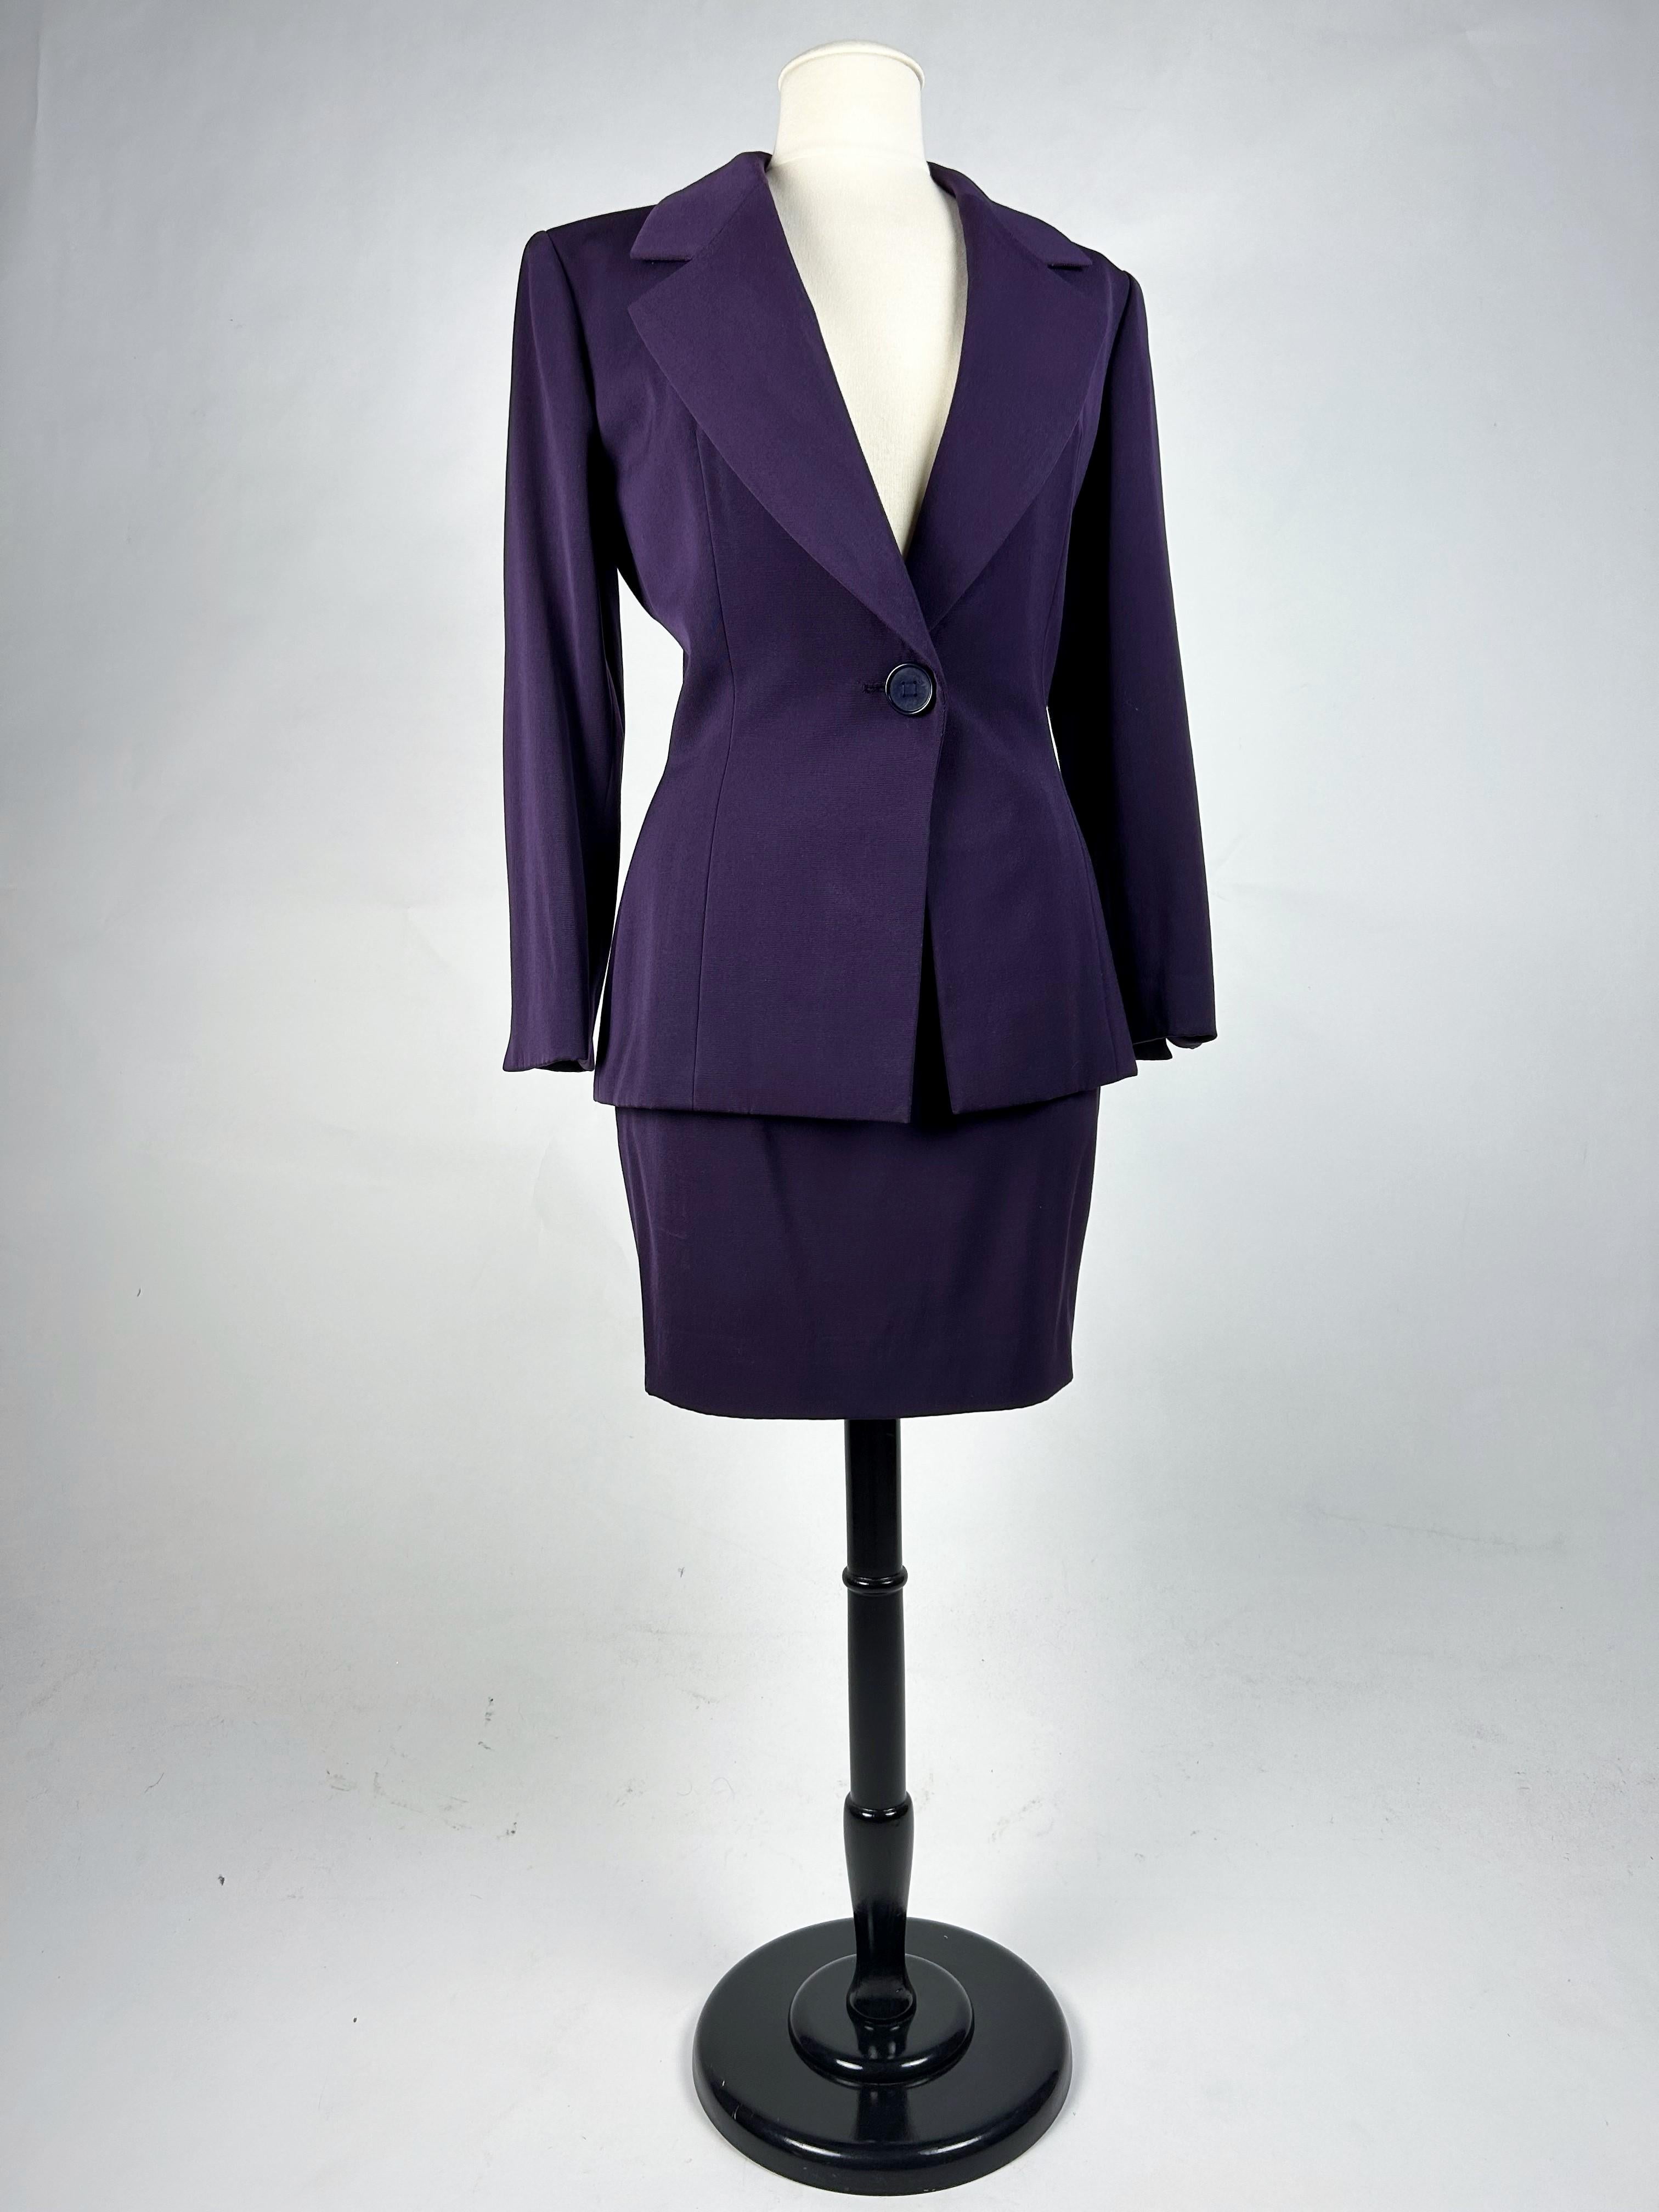 Skirt suit by Gianfranco Ferré for Christian Dior Haute Couture Circa 1995 For Sale 1